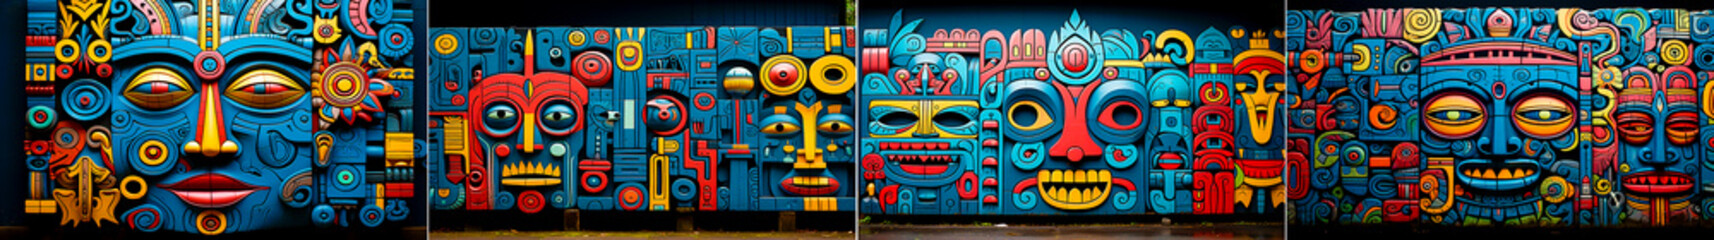 colorful mural with colorful paint of ancient Indian objects, Aztec art style, expressive faces, dark blue and sky blue, cubo-futurism, frightening creatures